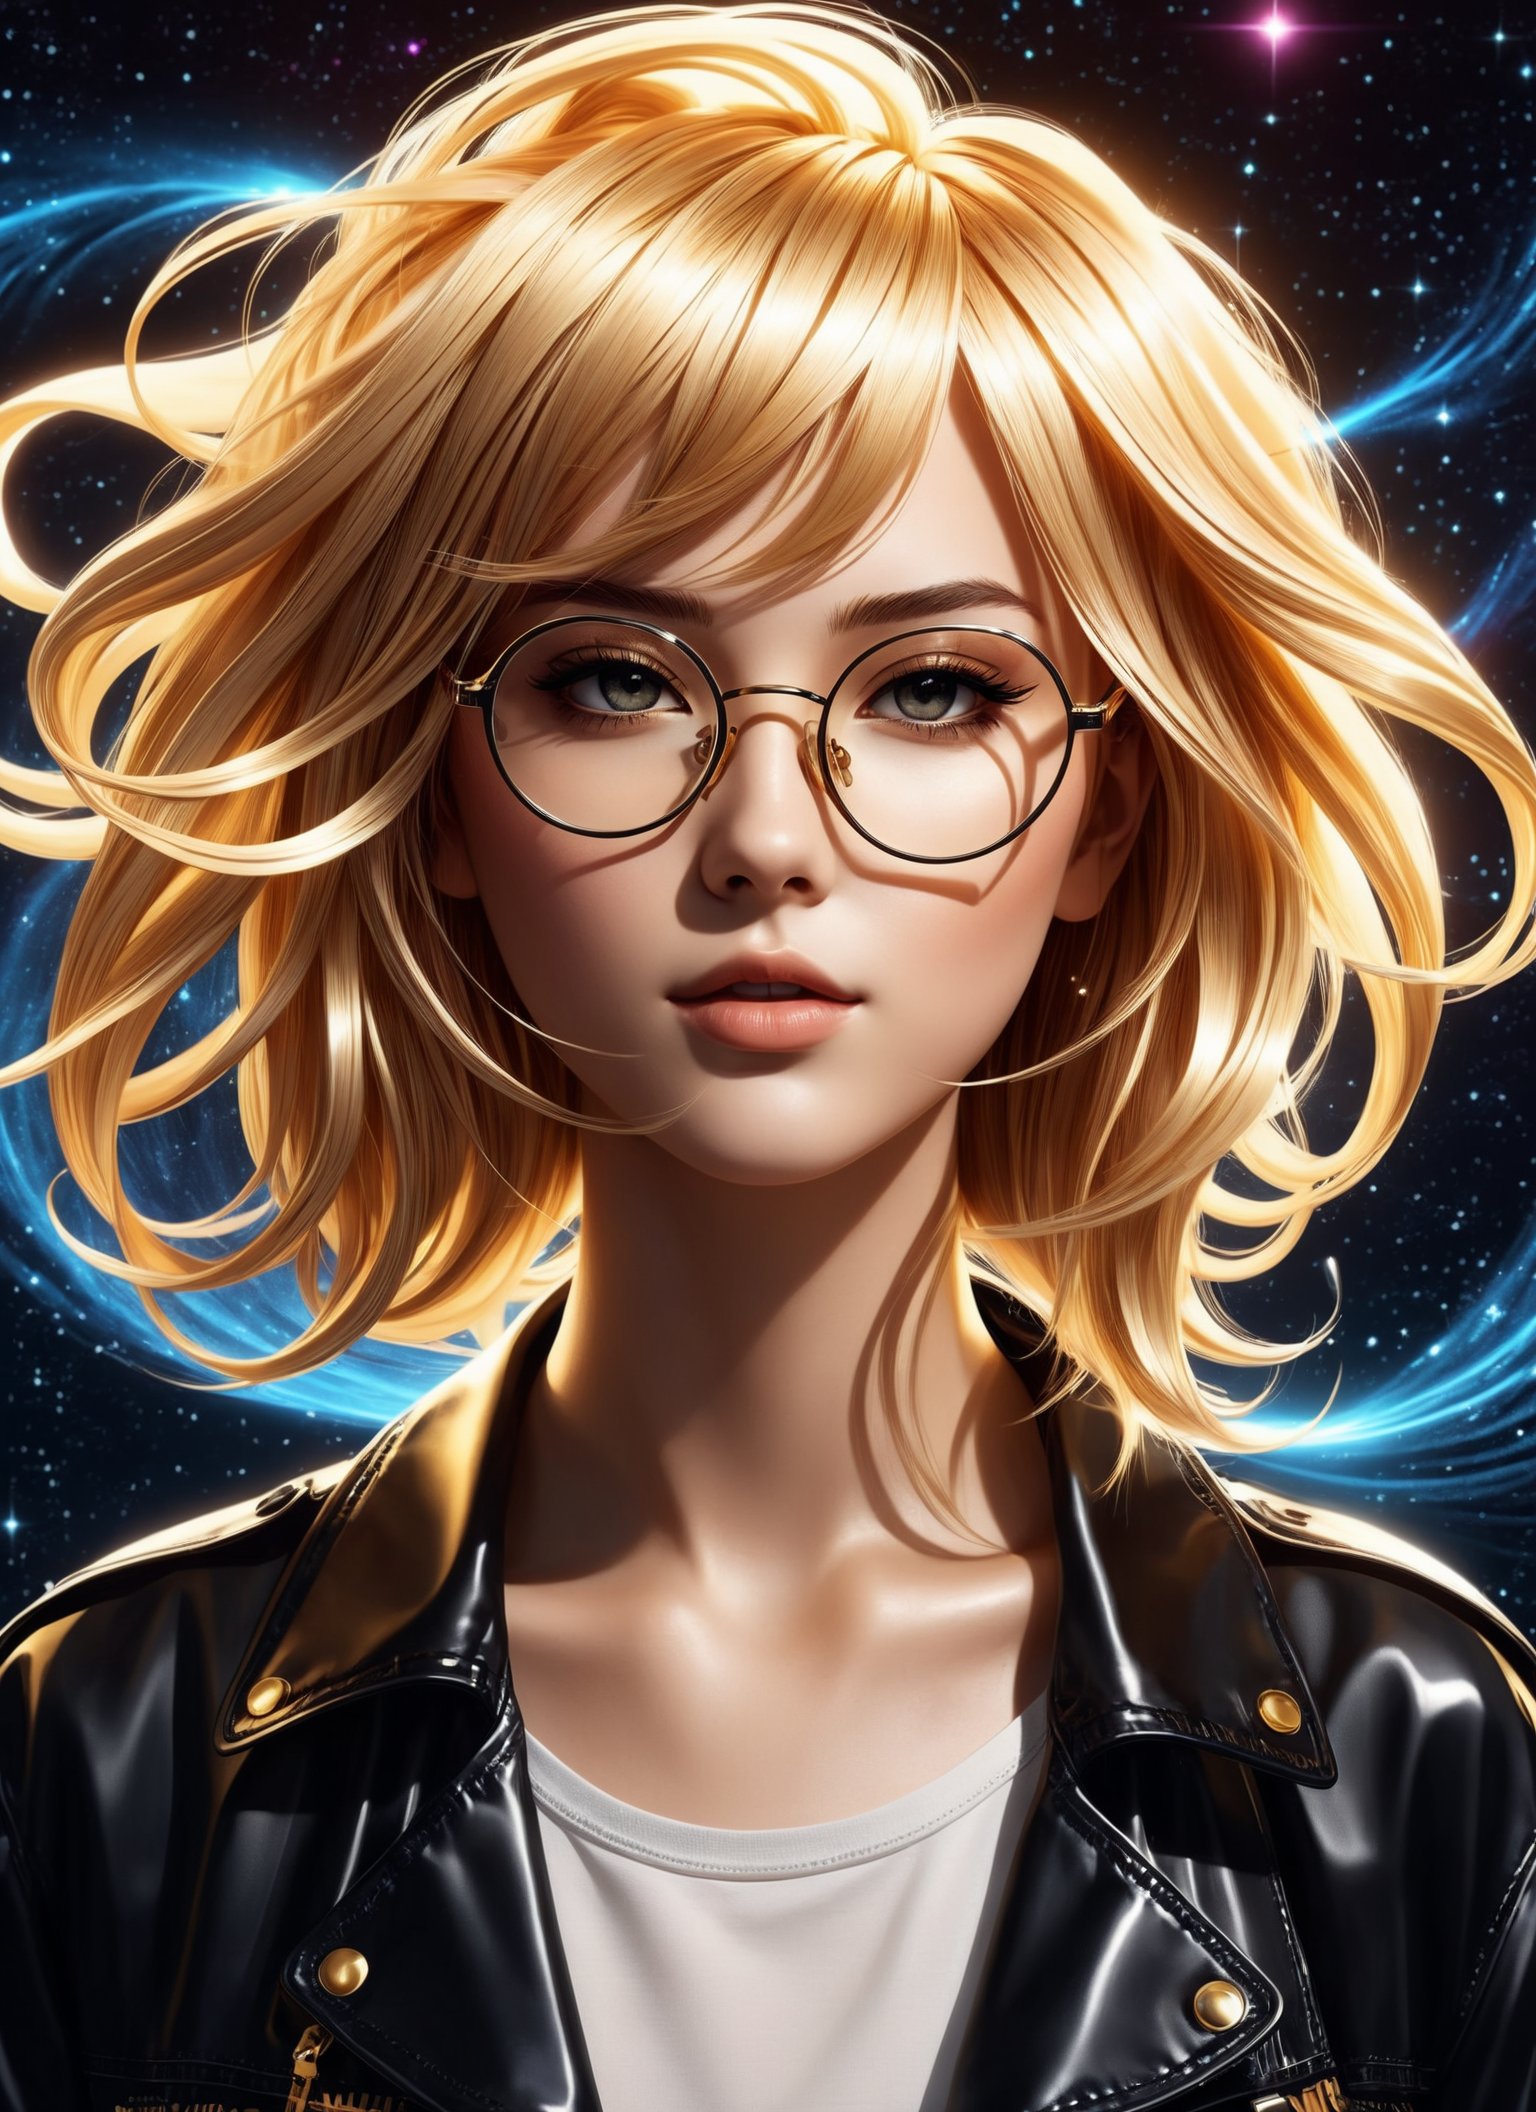 photorealistic Medium format photography, (Anime girl with cosmic swirls backdrop:1.3), Golden ratio composition, Stylish glasses, Flowing hair strands, (Modern punk elements:1.2), Dark animated backdrop, Full HD vector quality, Conviction illustrated, Character's mood shining . highly detailed, lifelike, precise, accurate